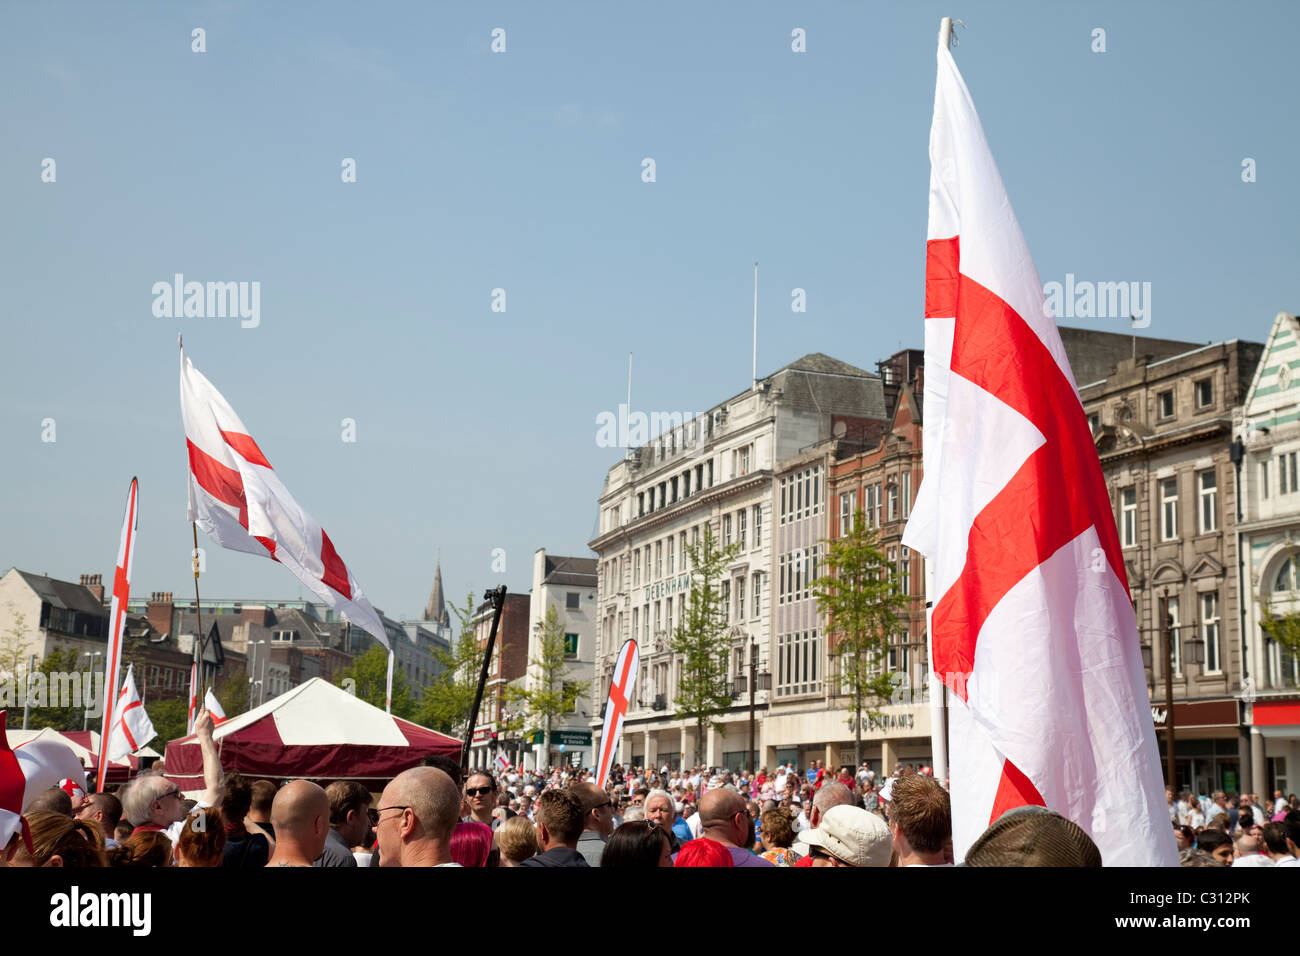 Saint St Georges Day celebrations in from of the Council House Nottingham old market square Nottingham England UK Stock Photo